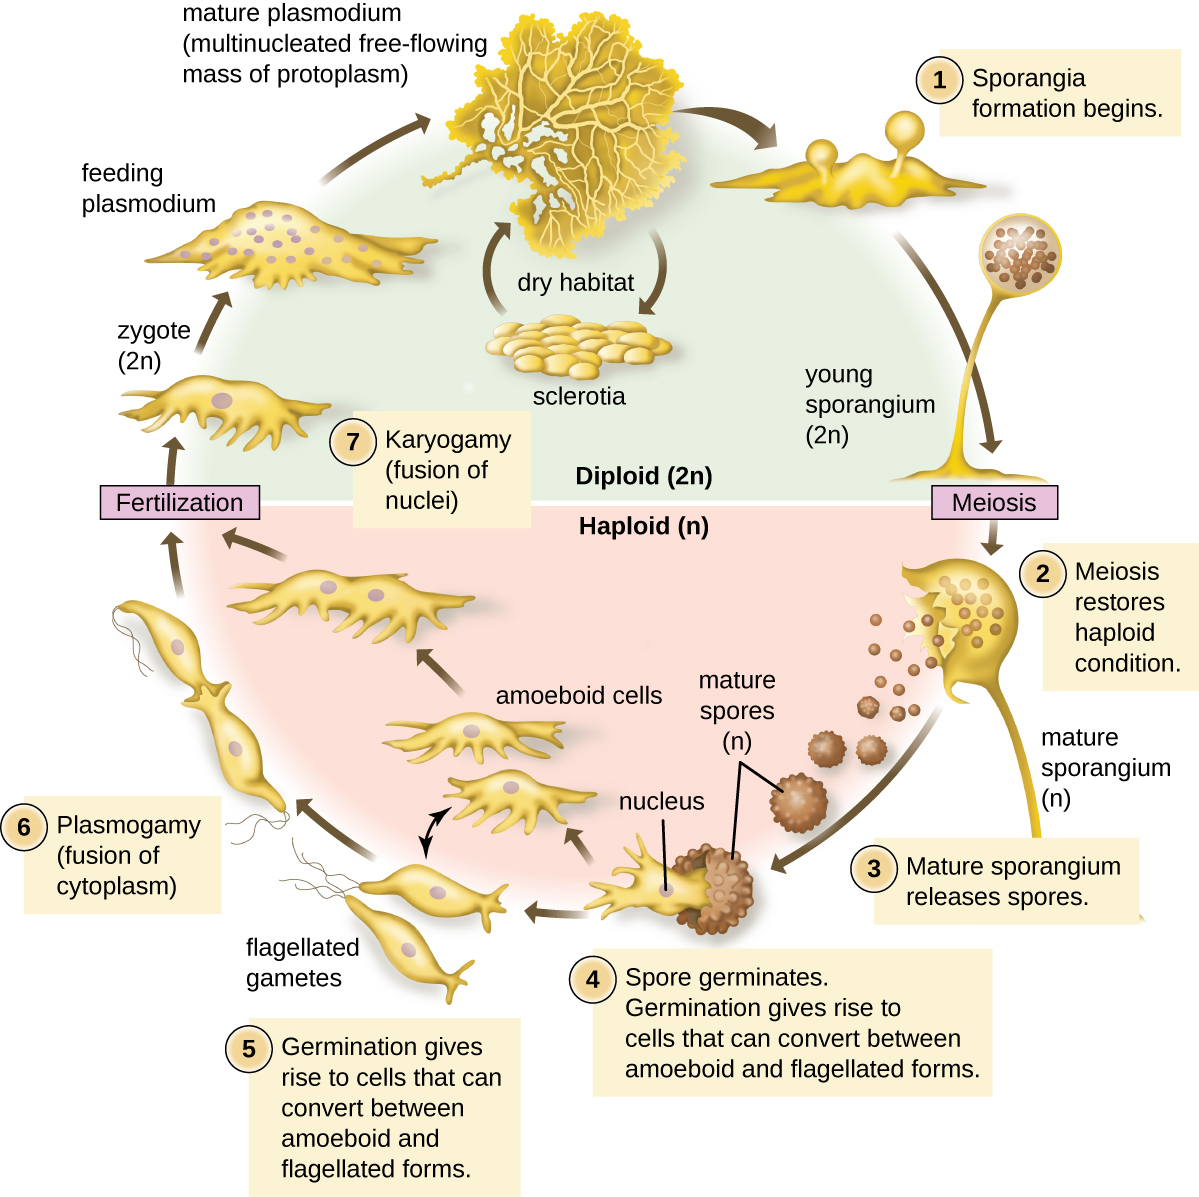 Life cycle of a plasmodial slime mold